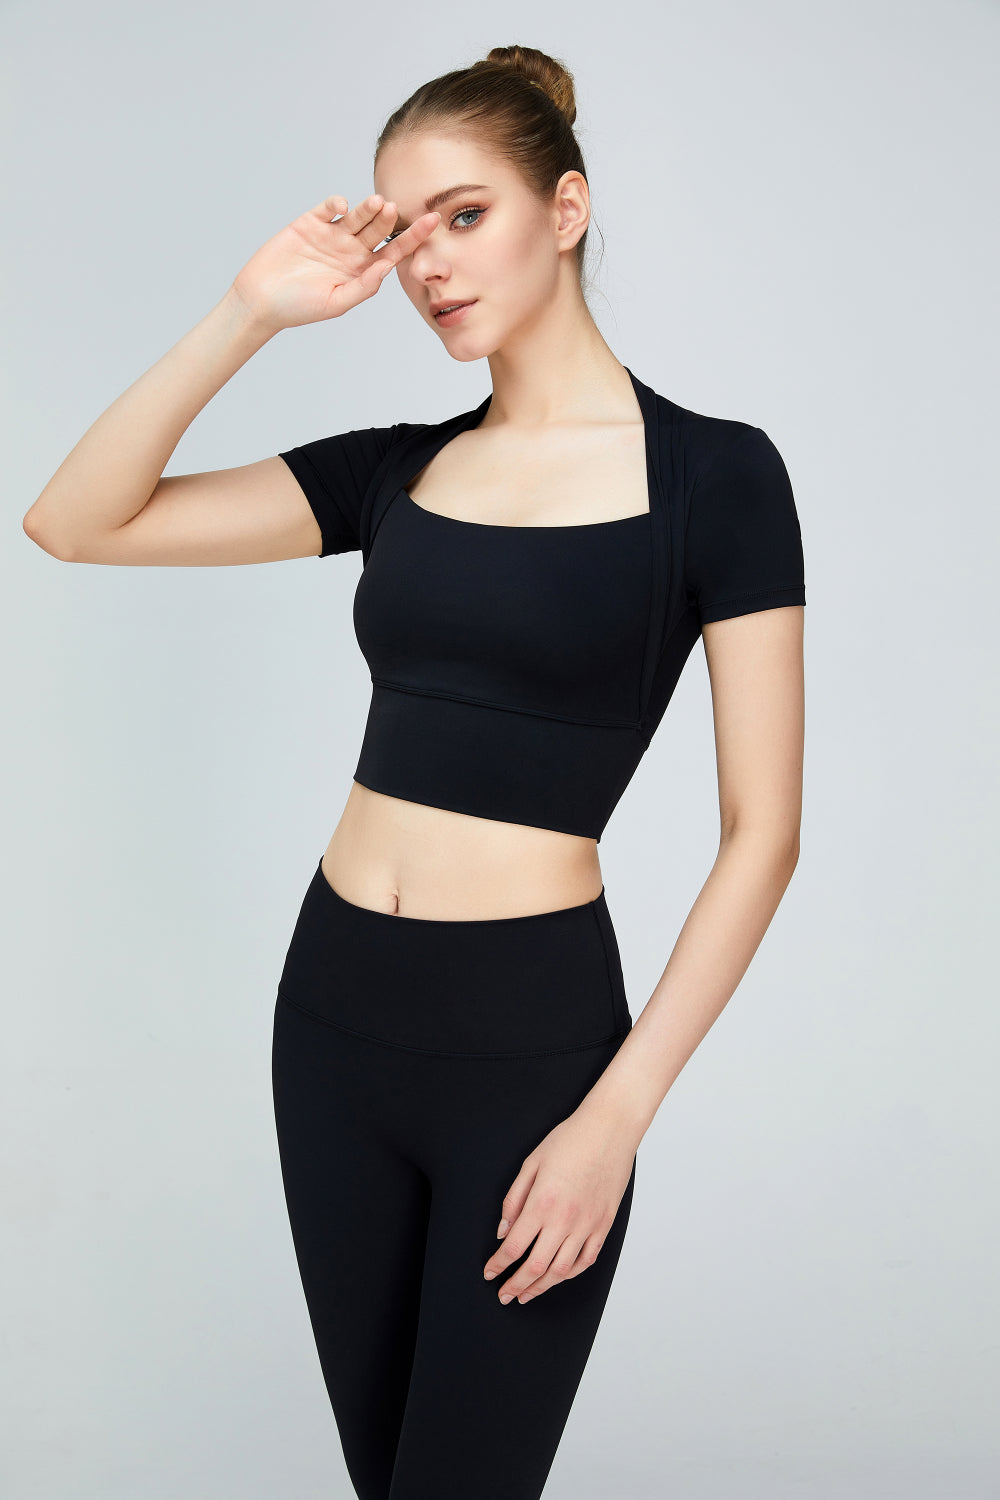 Women’s Short Sleeve Cropped Sports Top